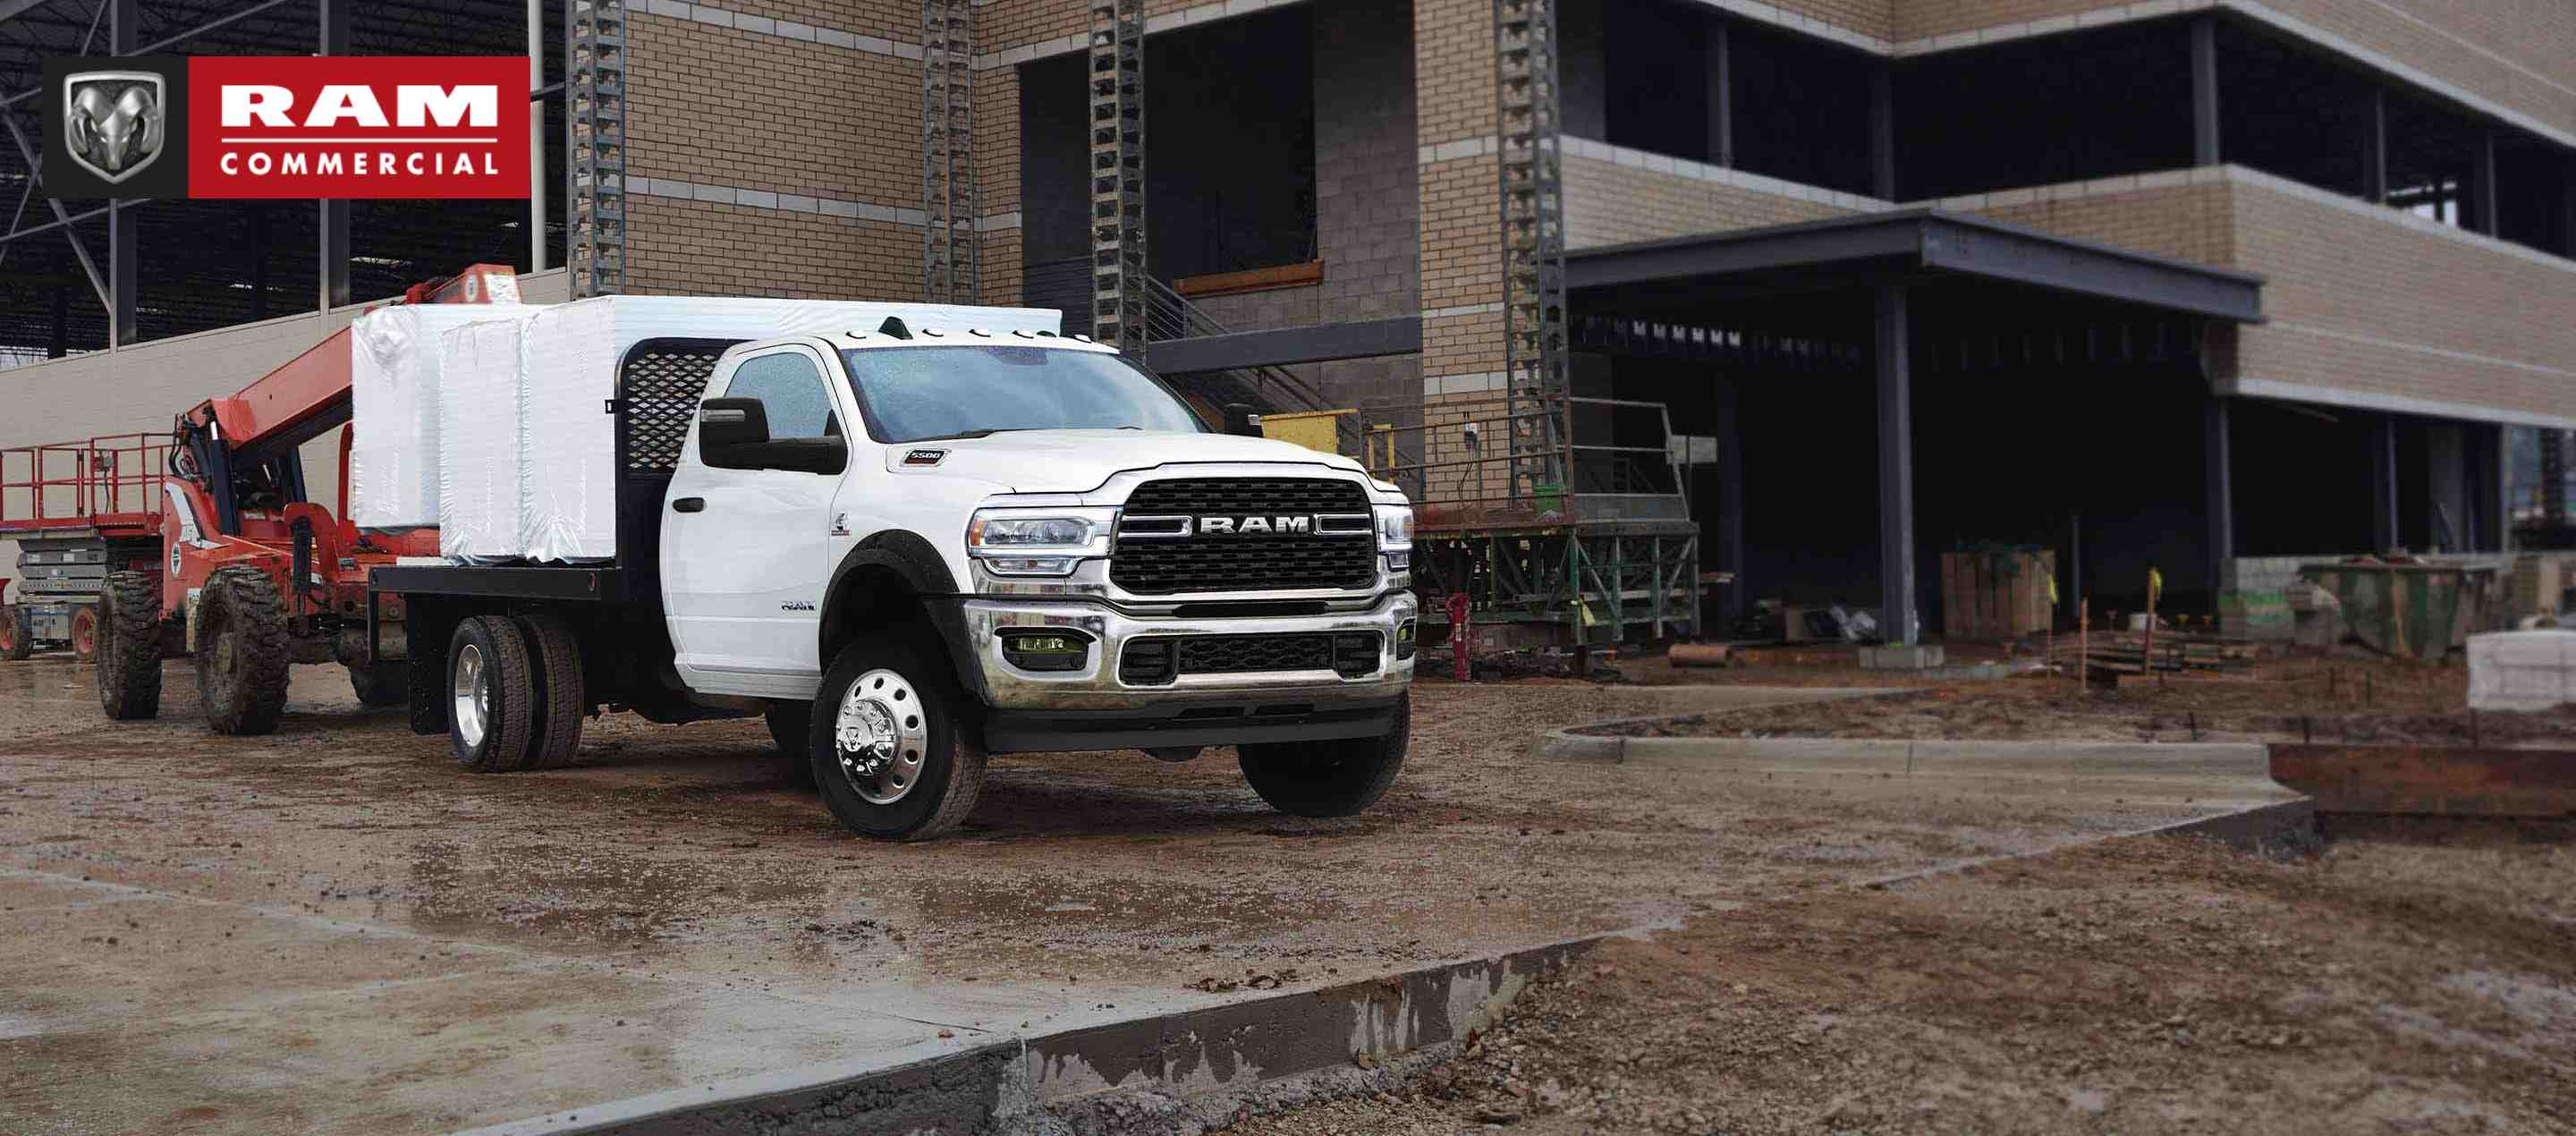 A 2023 Ram Chassis Cab with a platform upfit loaded with building materials, parked at a commercial construction site. Ram Commercial.